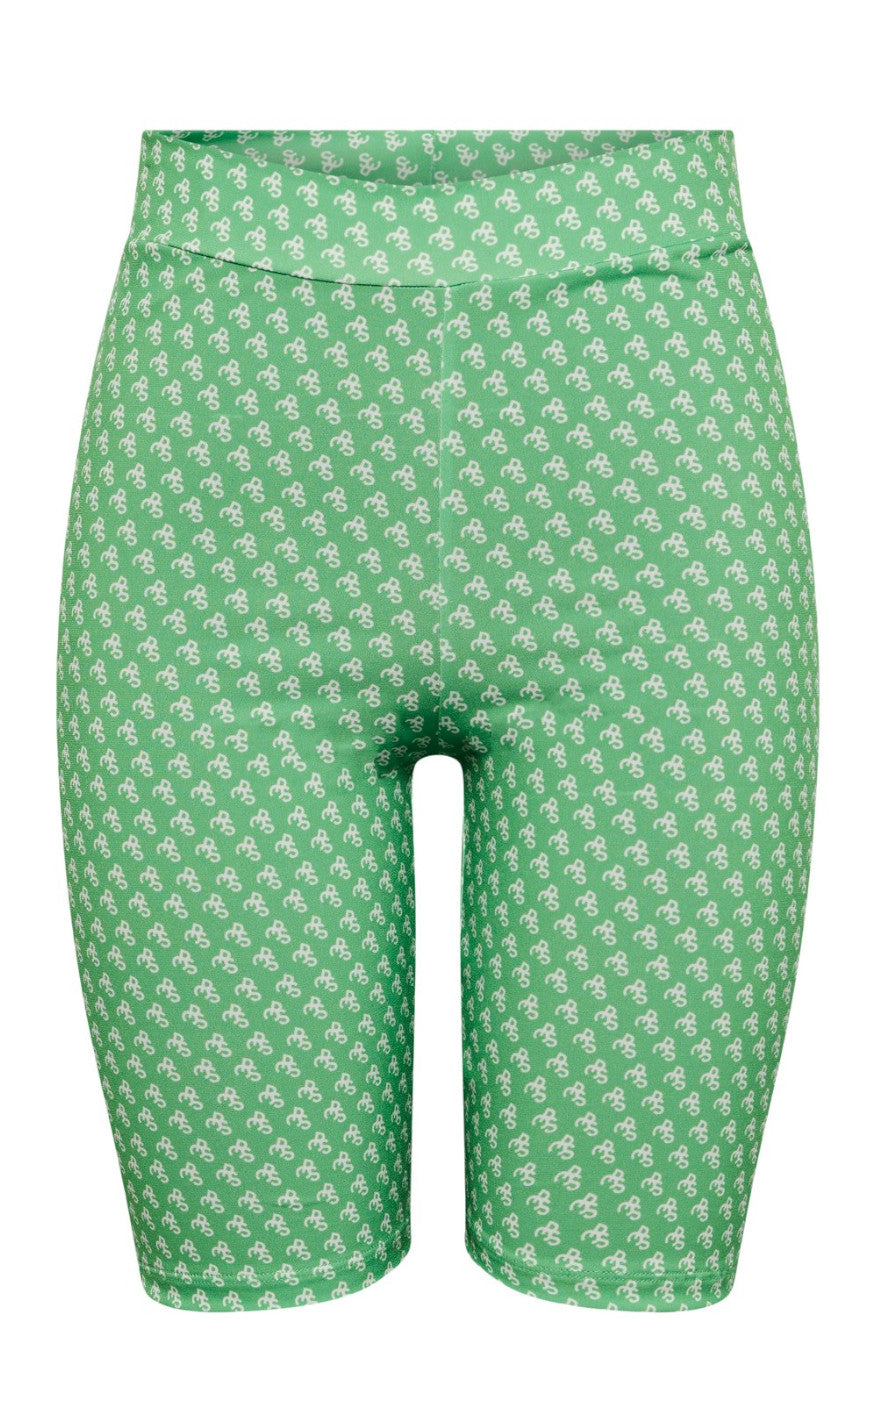 12: PIECES Shorts - Ammi - Poison Green